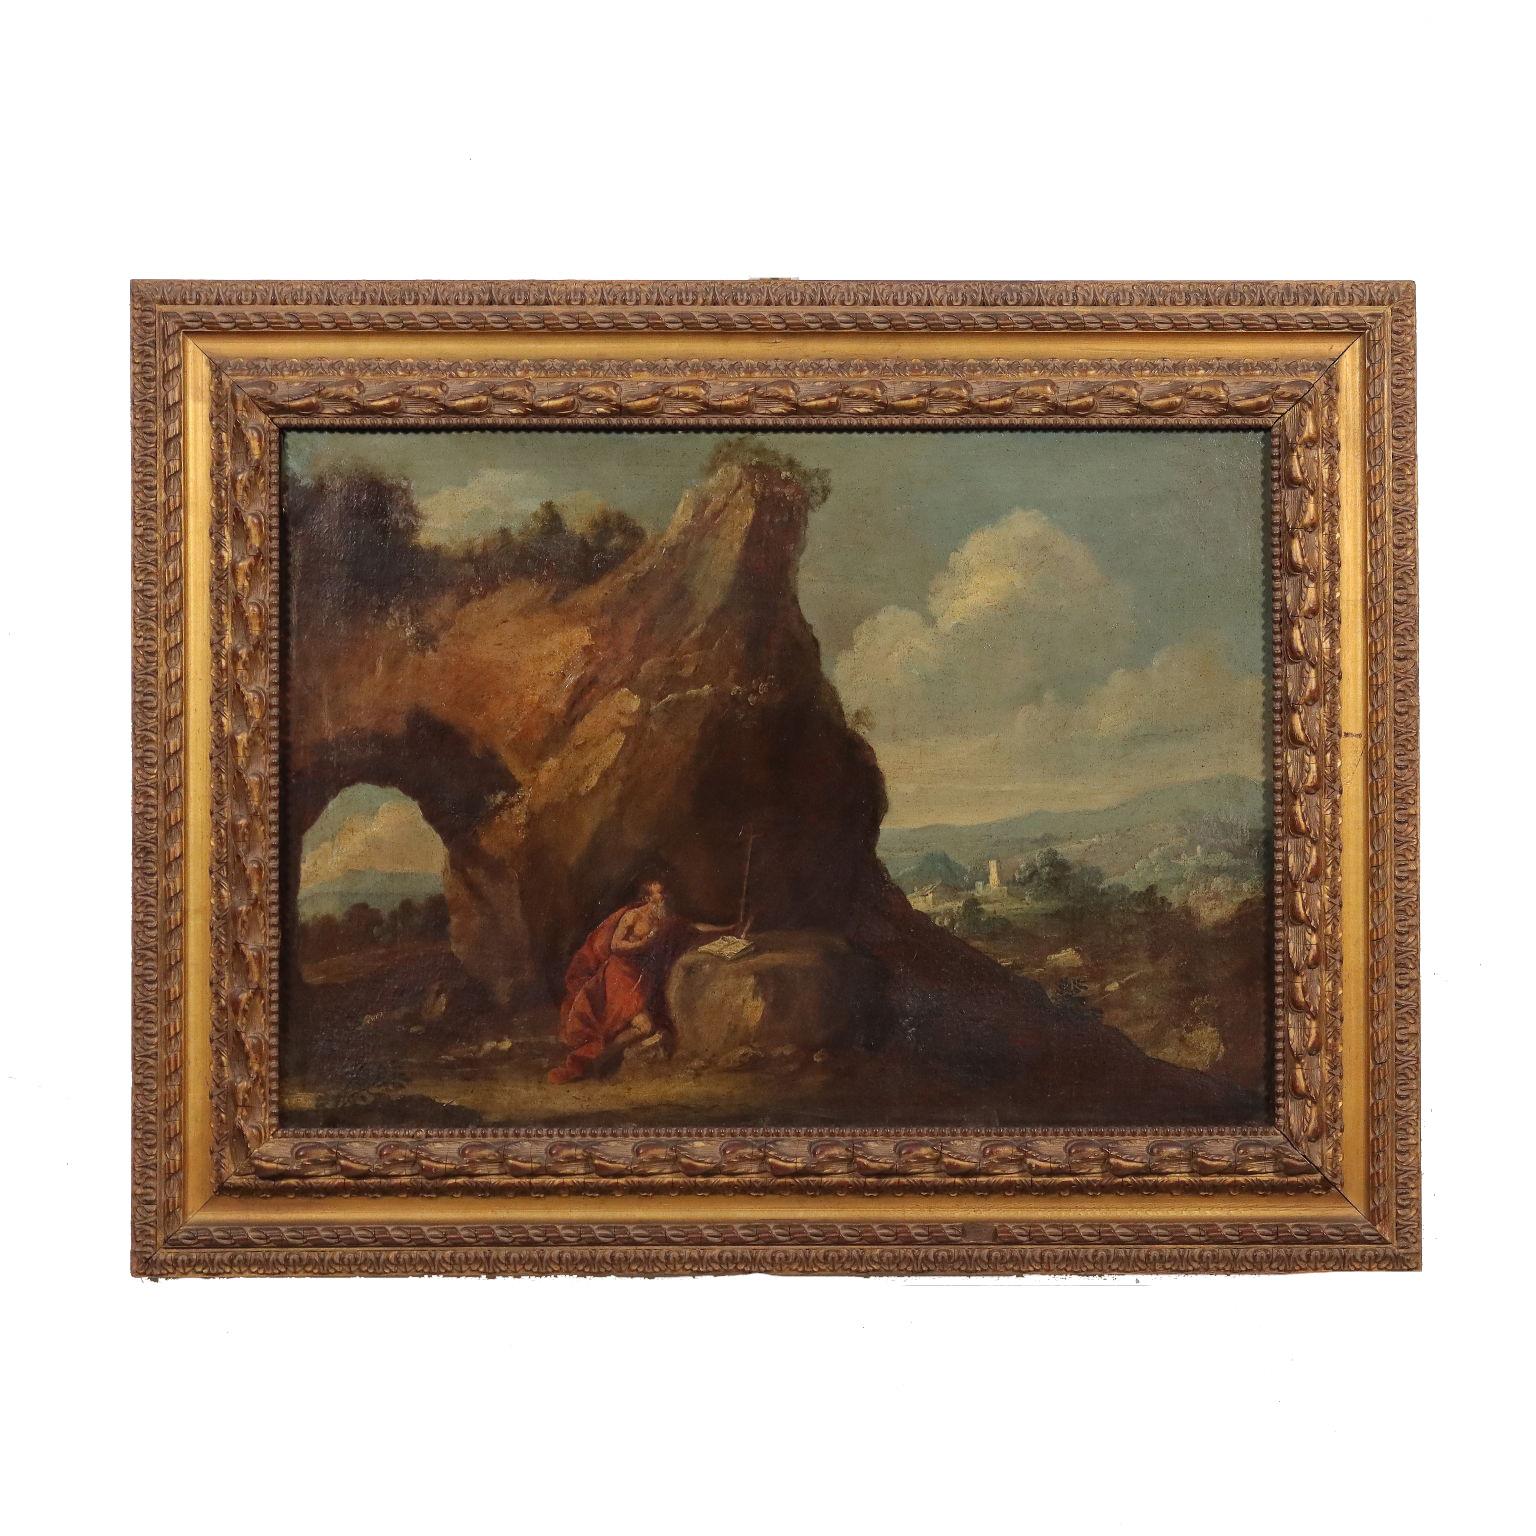 Unknown Landscape Painting - Landscape with the penitent St. Jerome, XVIIth - XVIIIth century